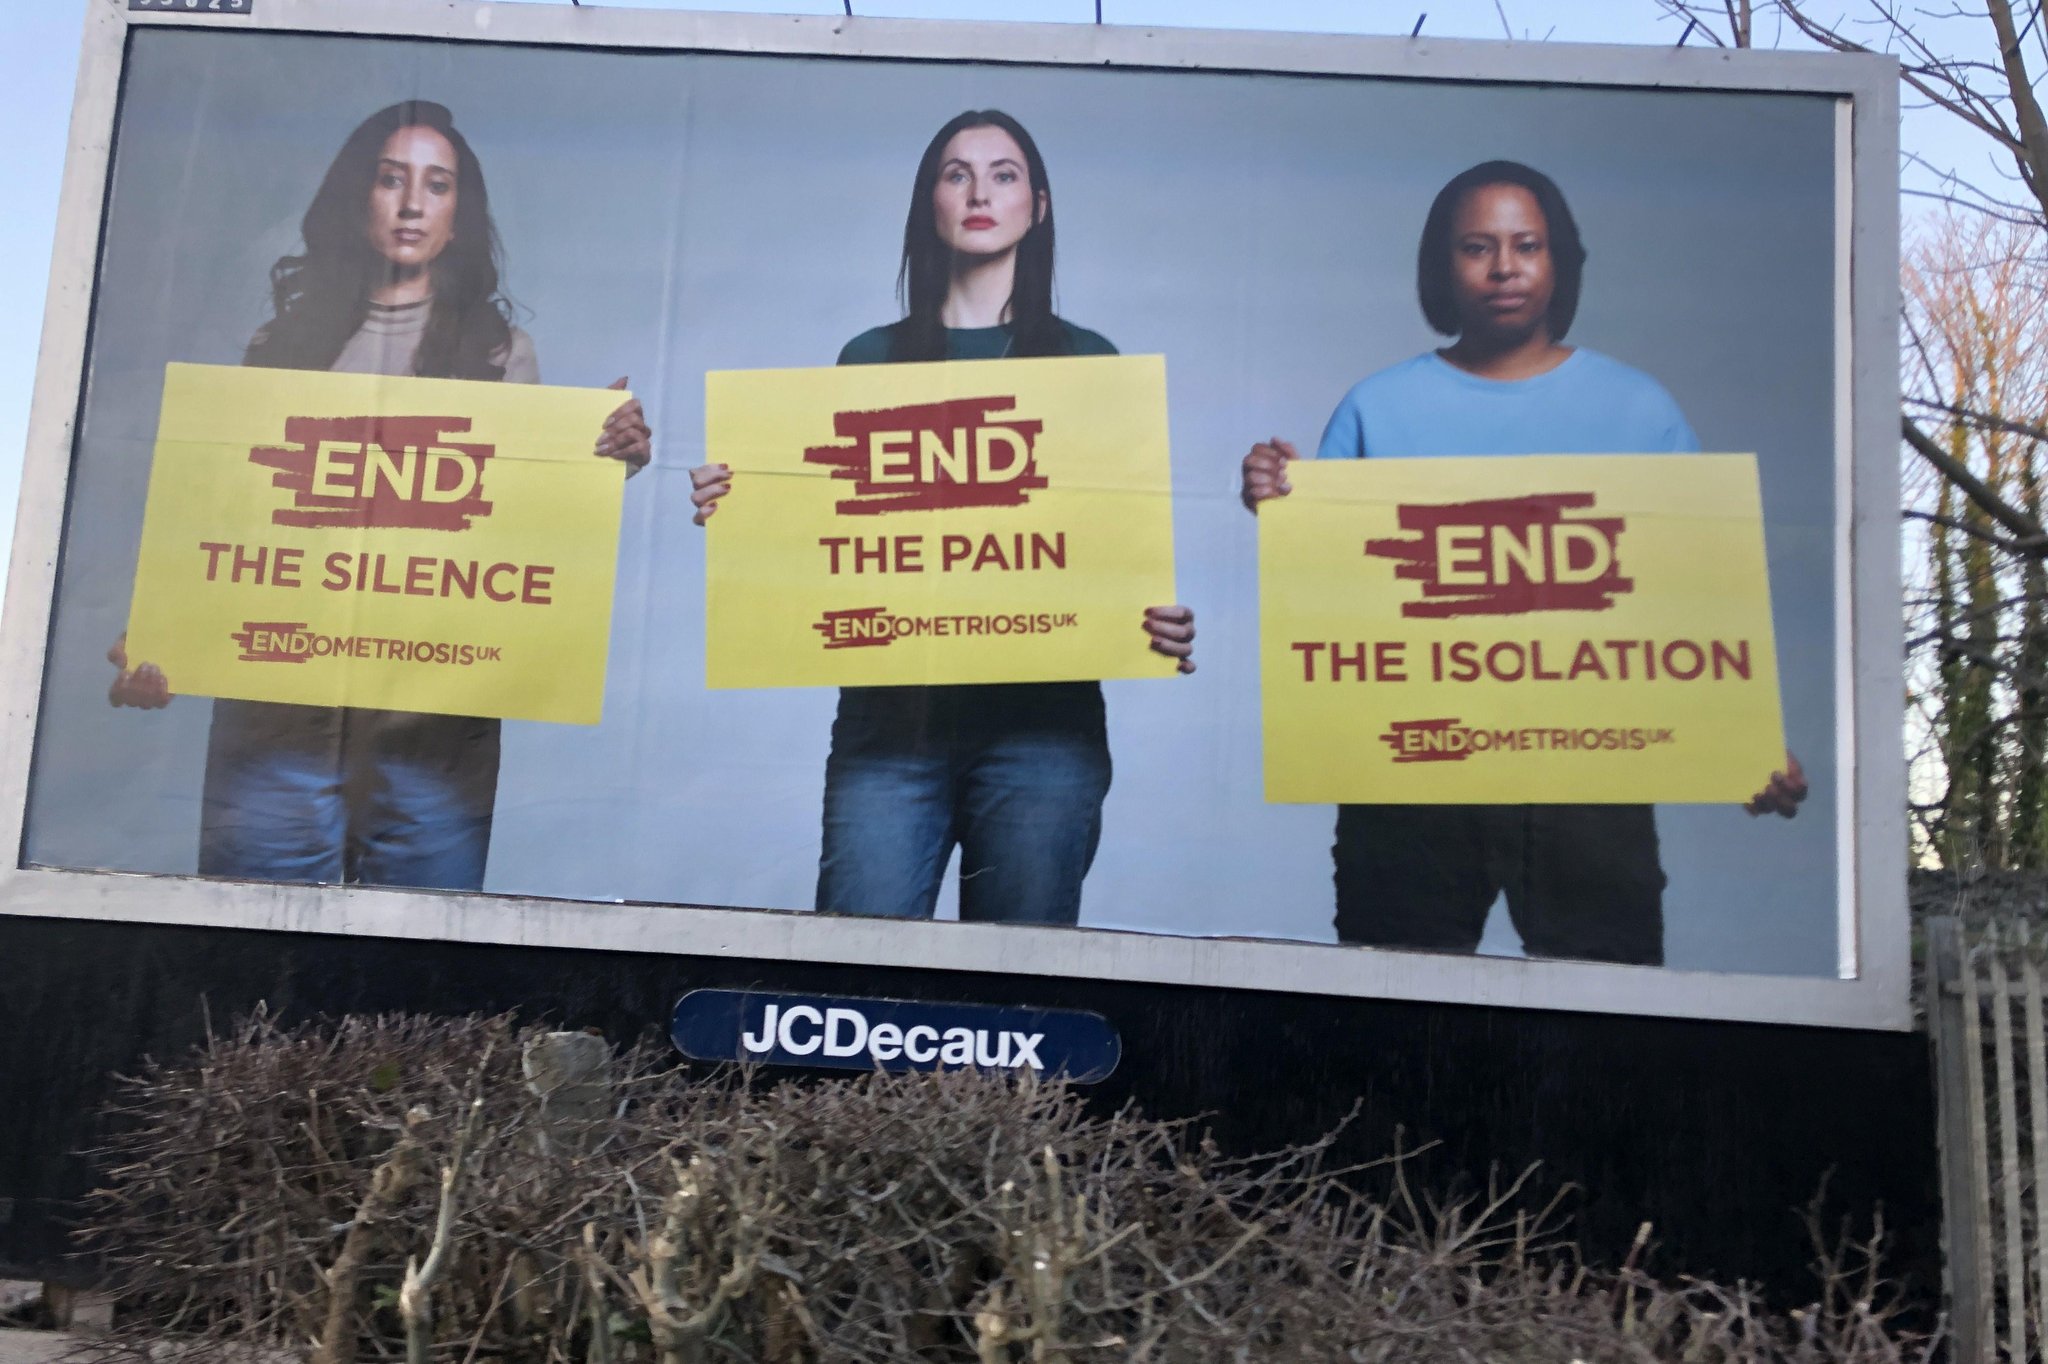 Anonymous Northern Ireland donor buys billboard space to support friend with endometriosis